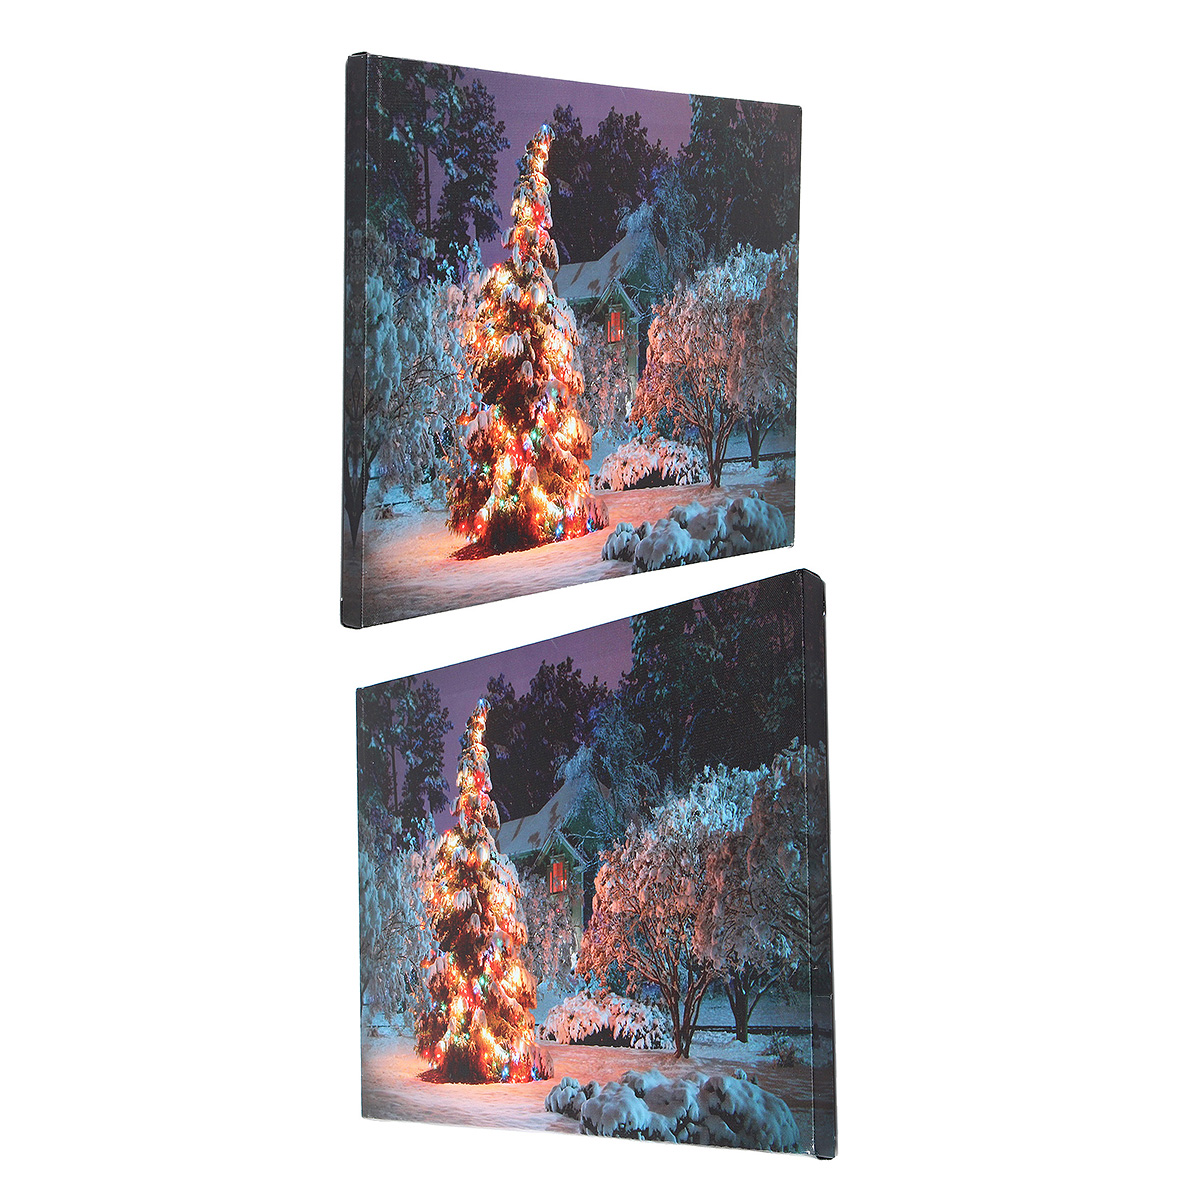 40 x 30cm Battery Operated LED Christmas Snowy House Front Tree Xmas Canvas Print Wall Art 